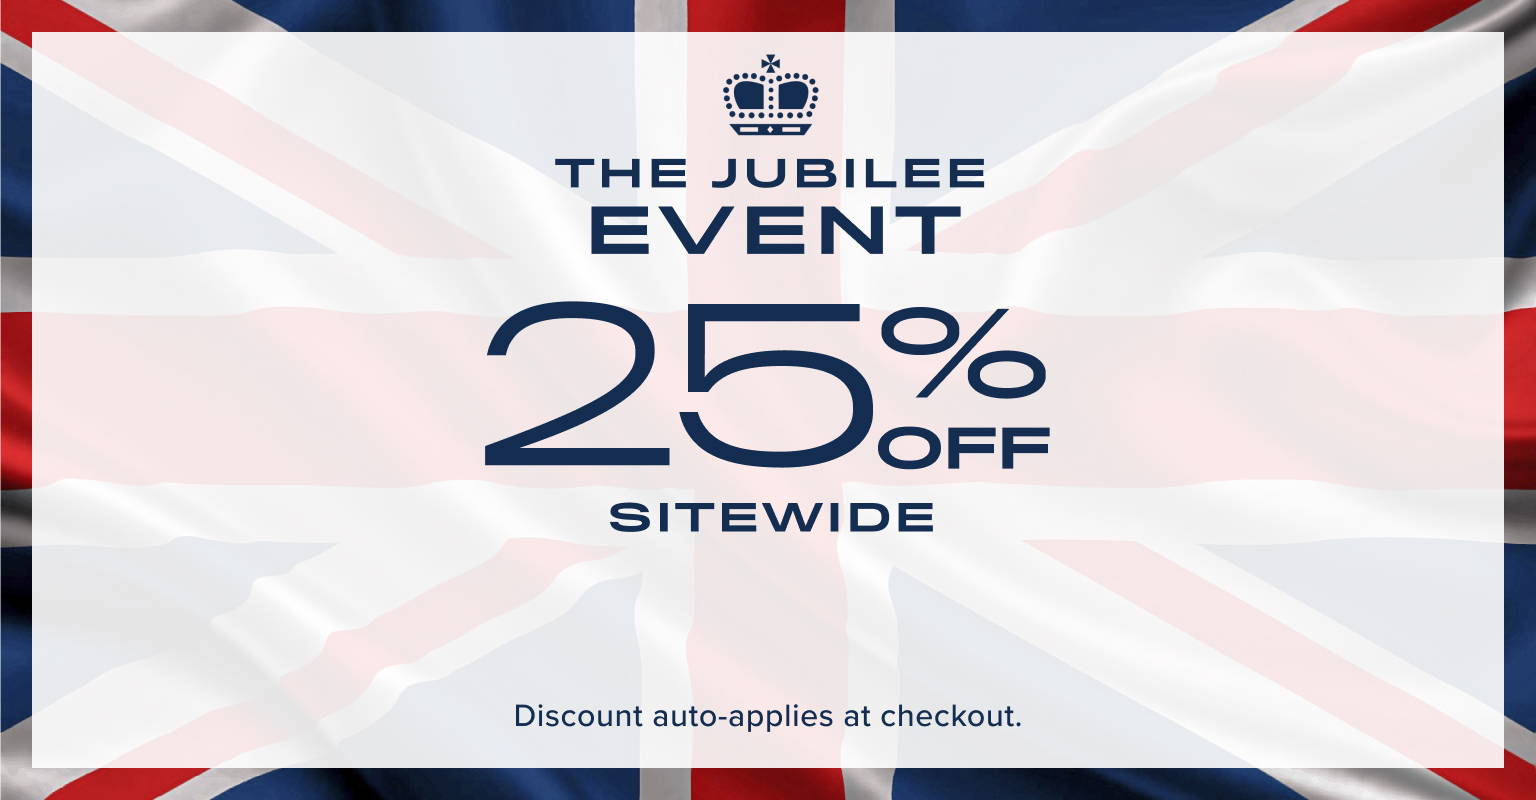 The Jubilee Event. 25% off sitewide